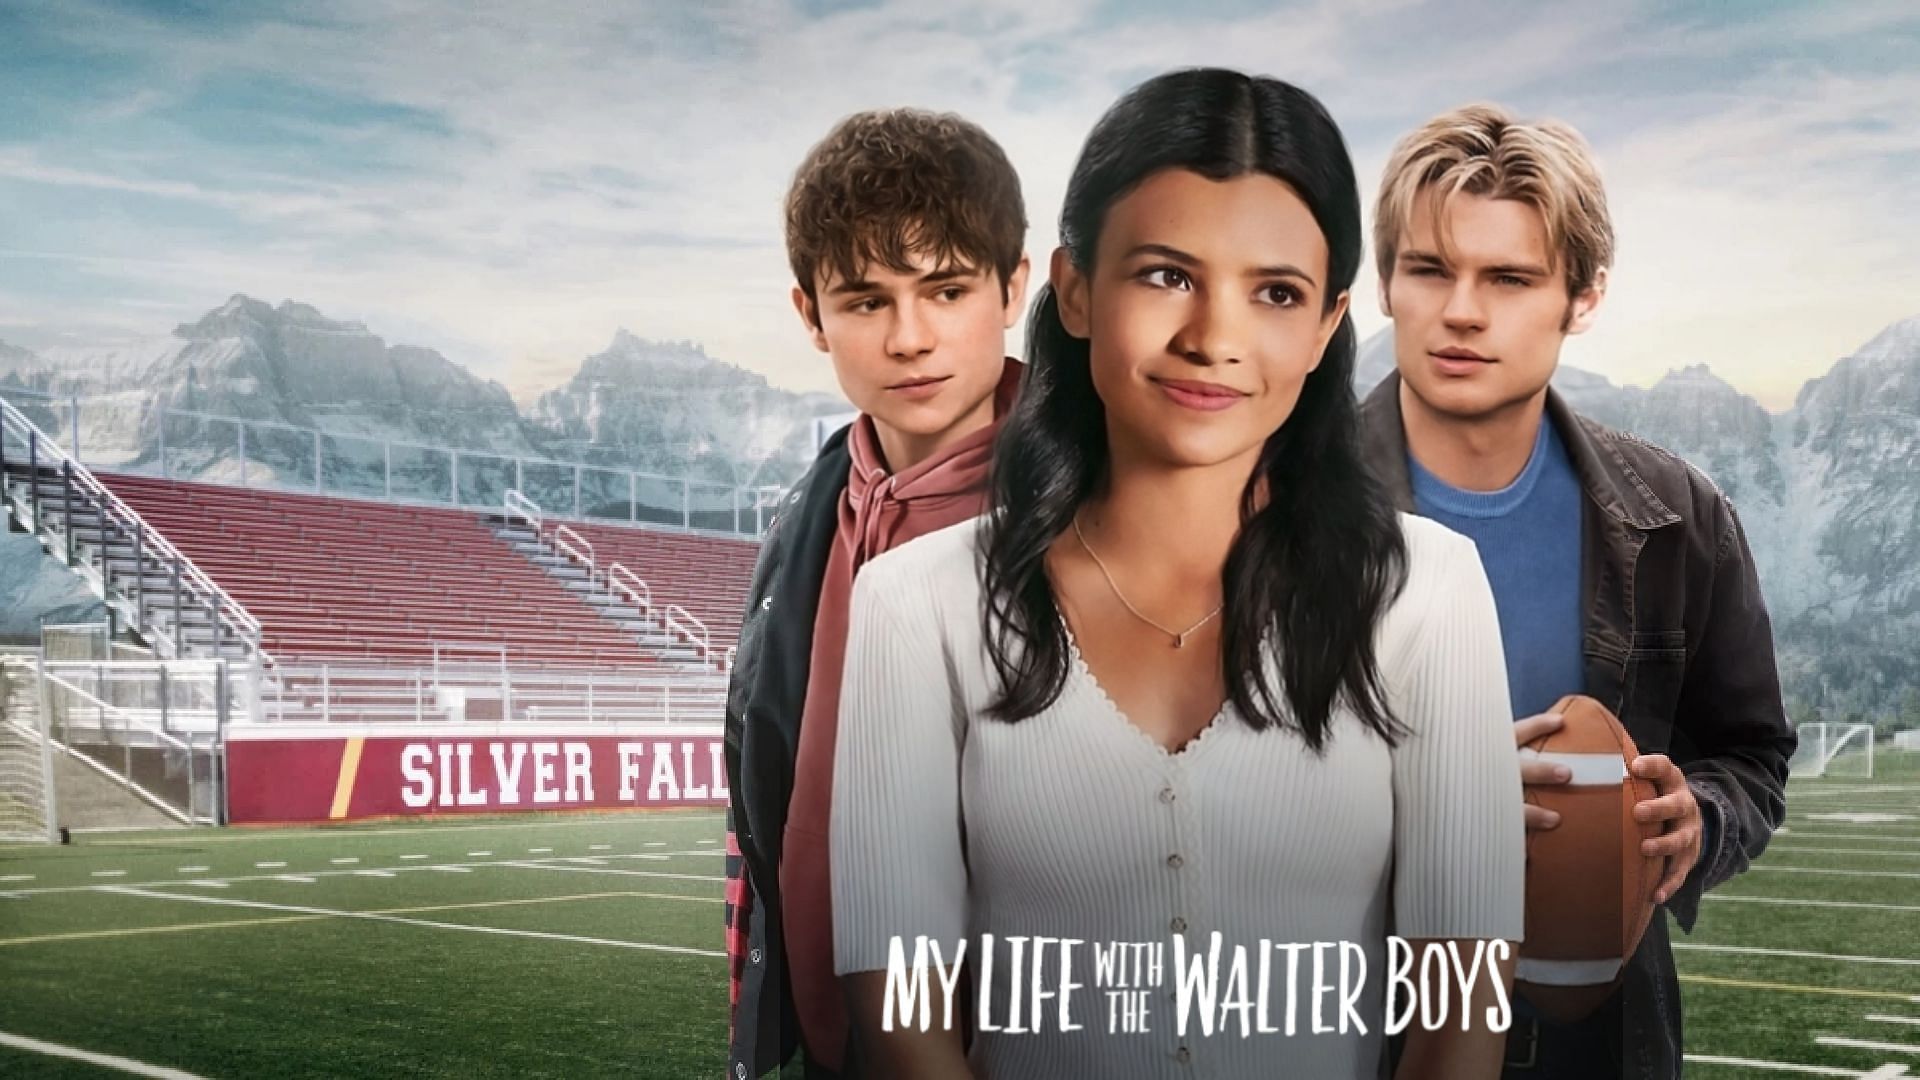 My Life With the Walter Boys poster (Image Via Netflix)